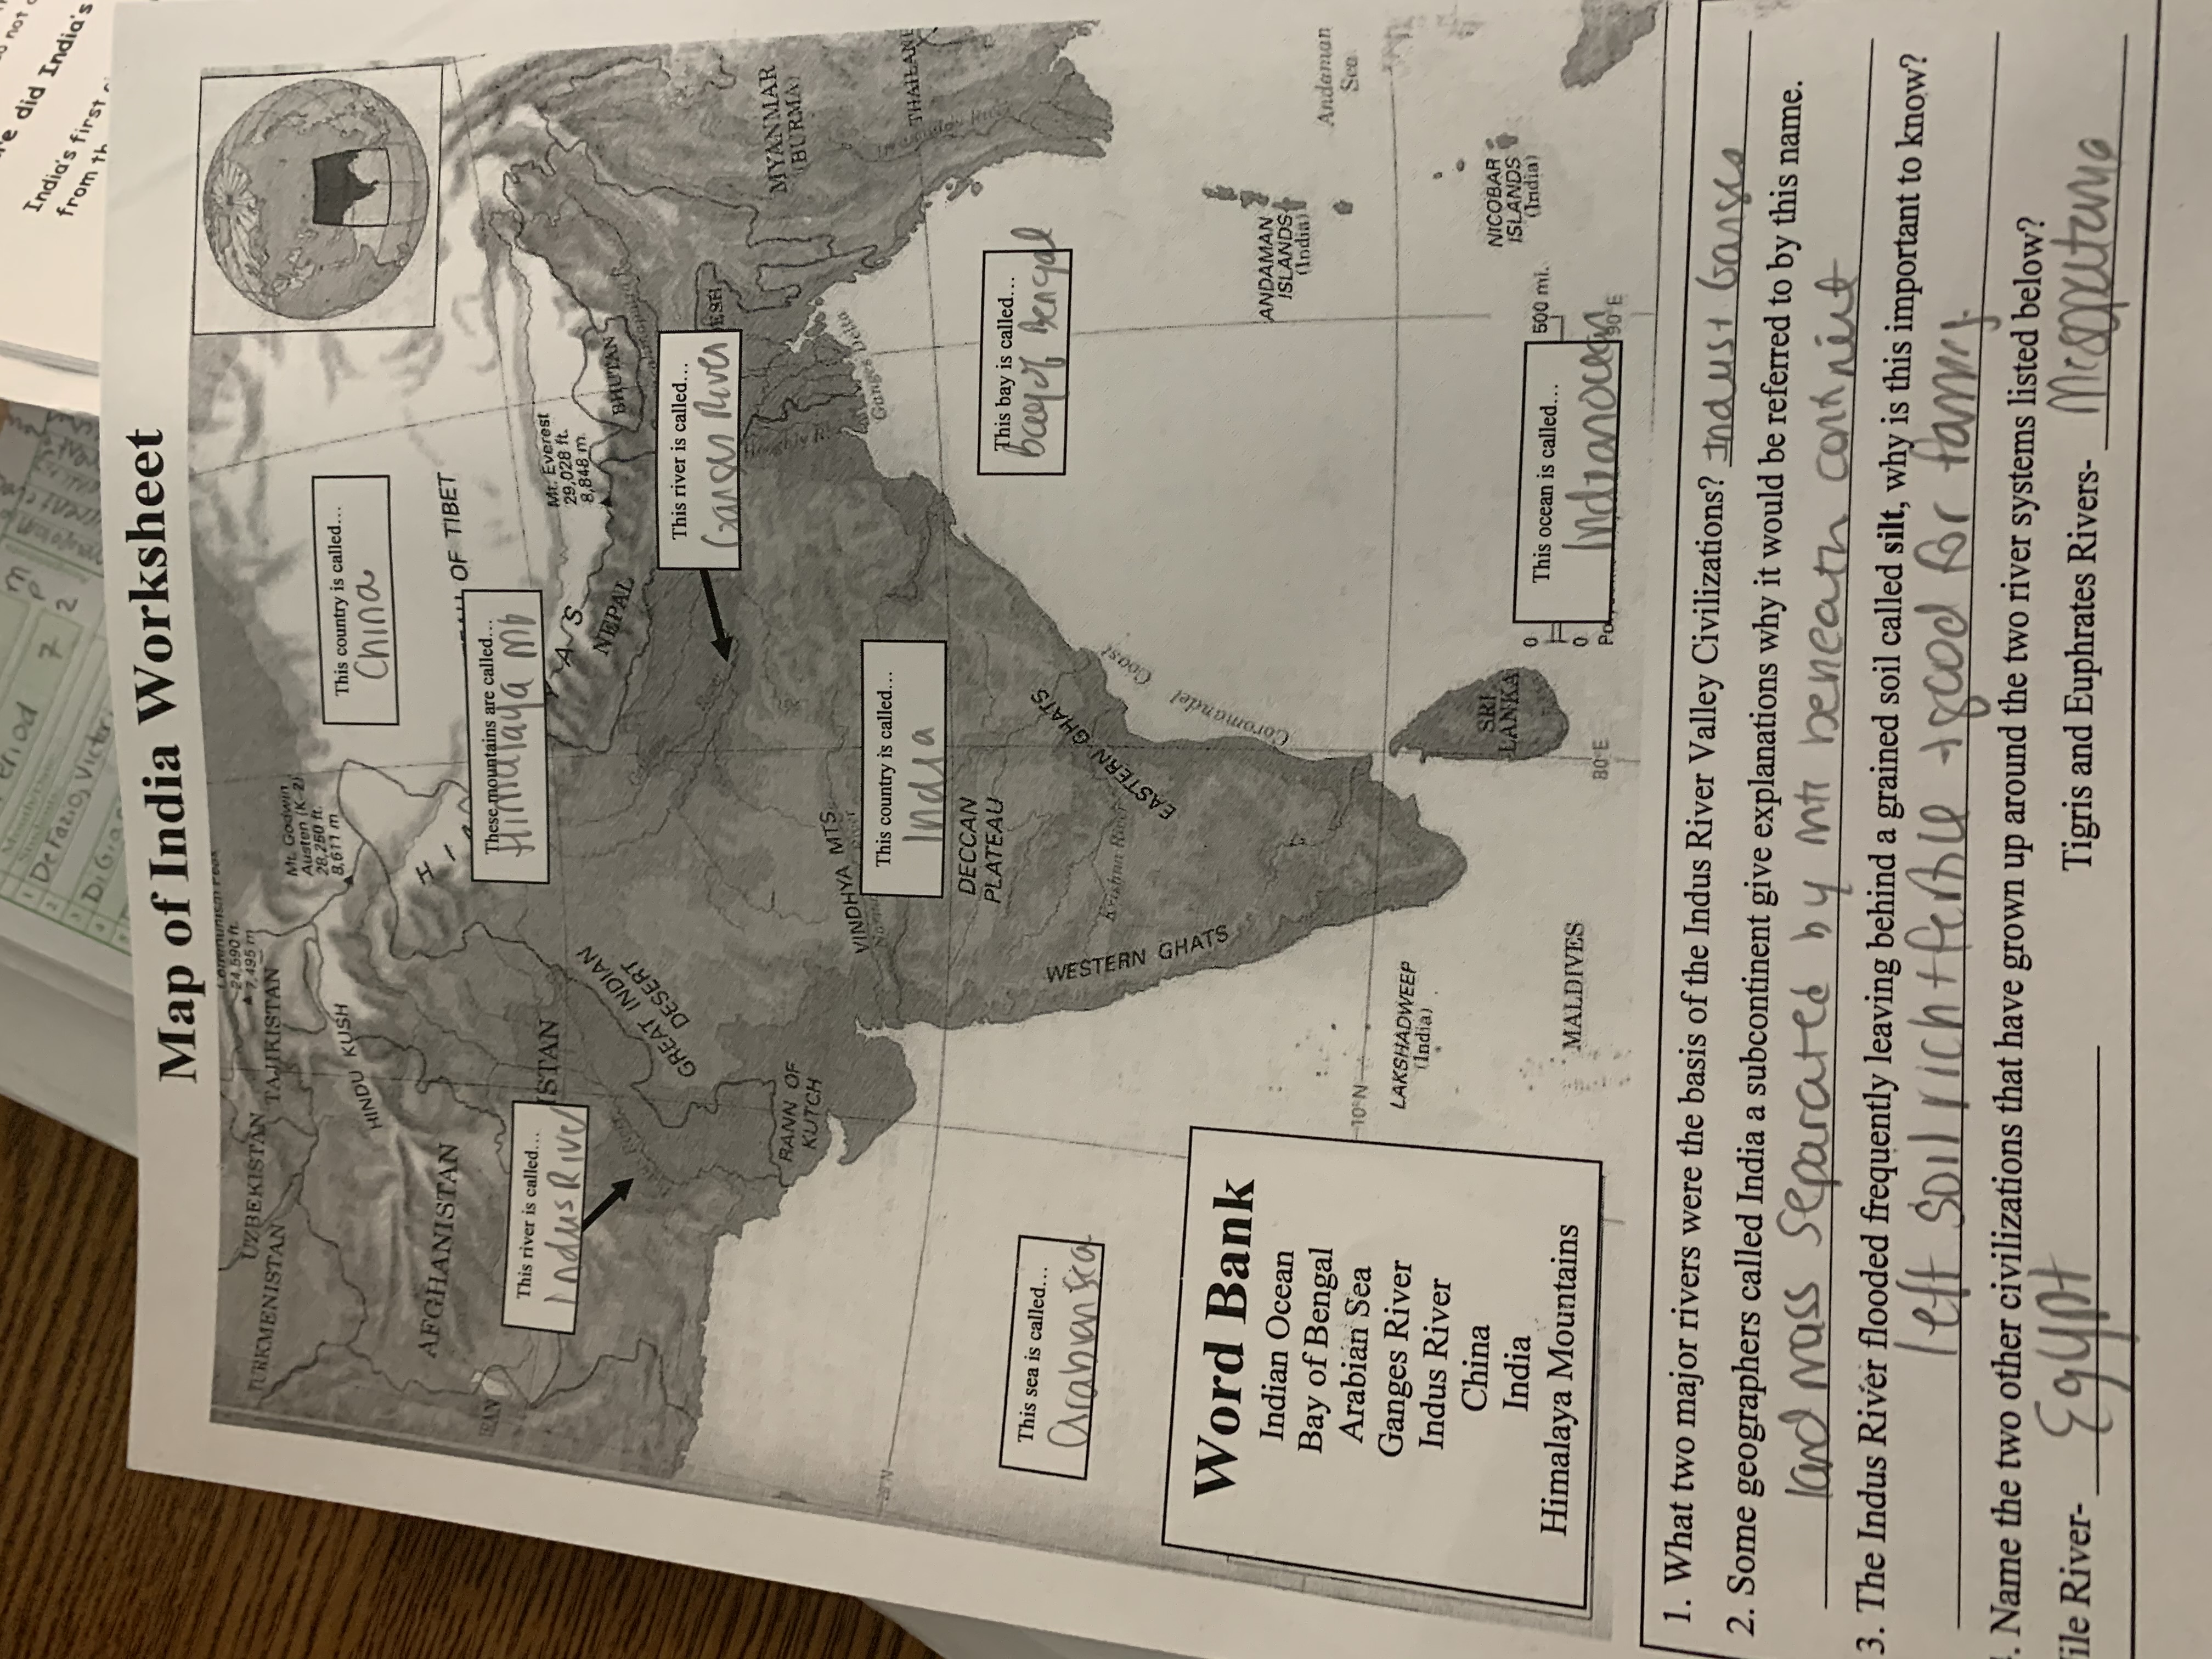 Global History 20 With Regard To River Valley Civilizations Worksheet Answers